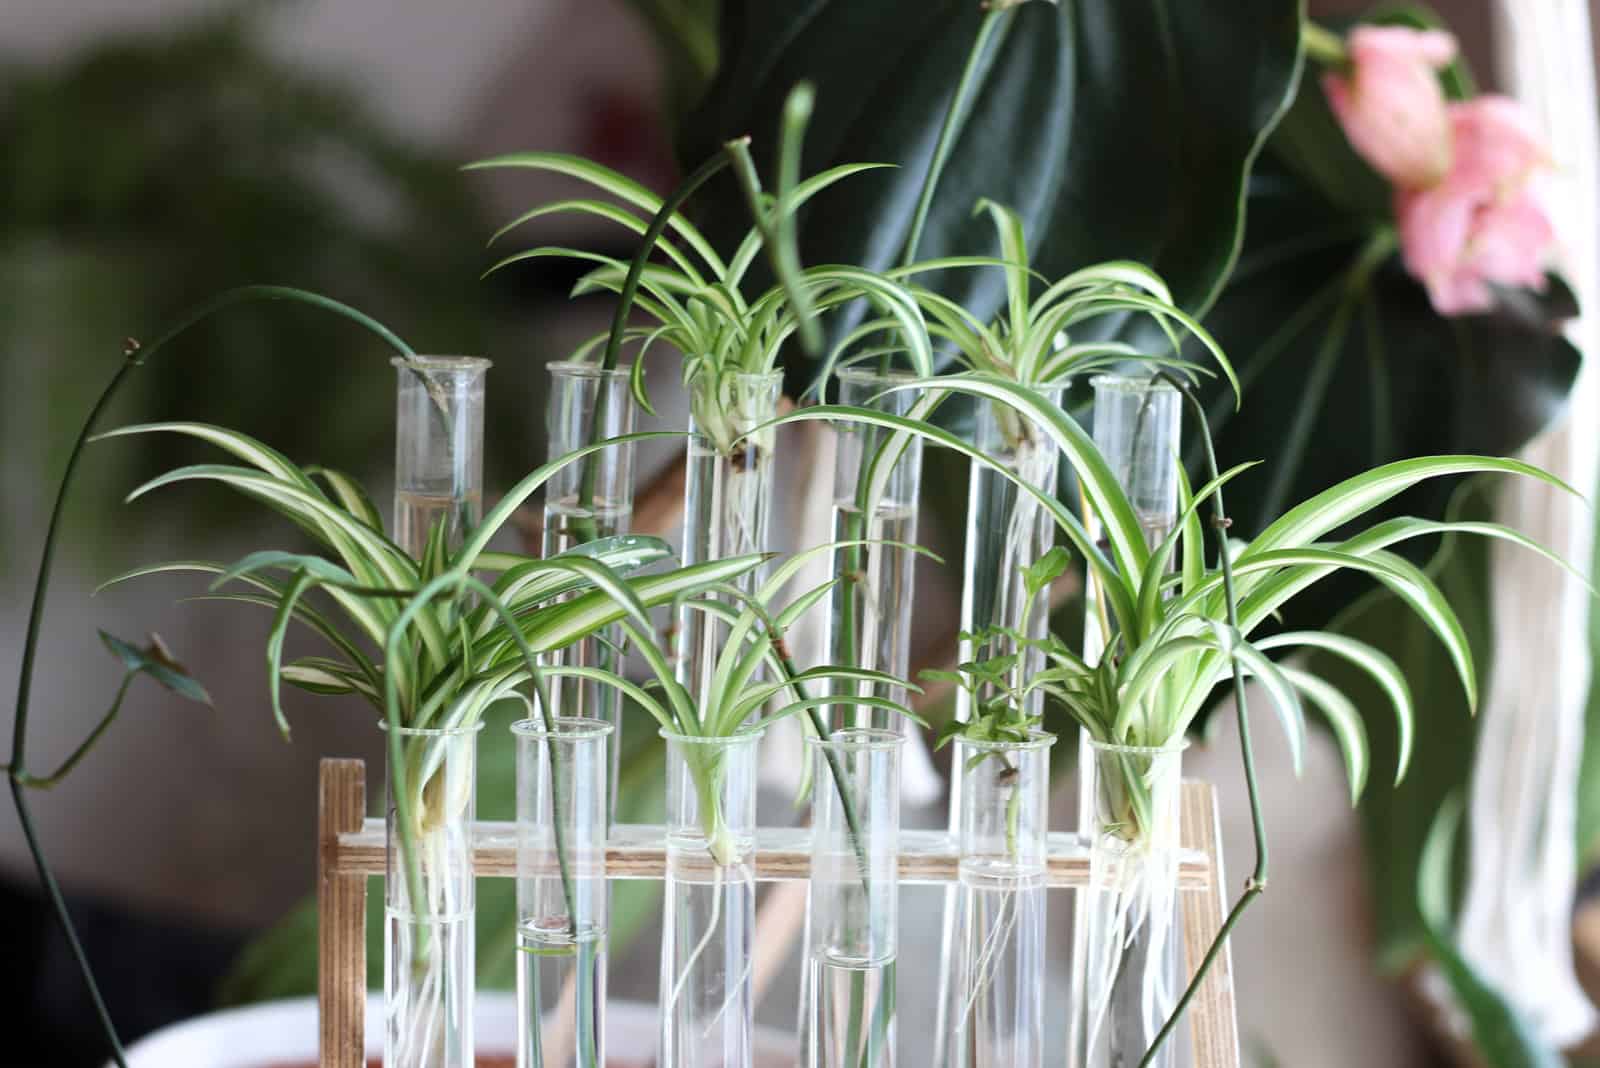 Self-made propagation station with monstera cuttings